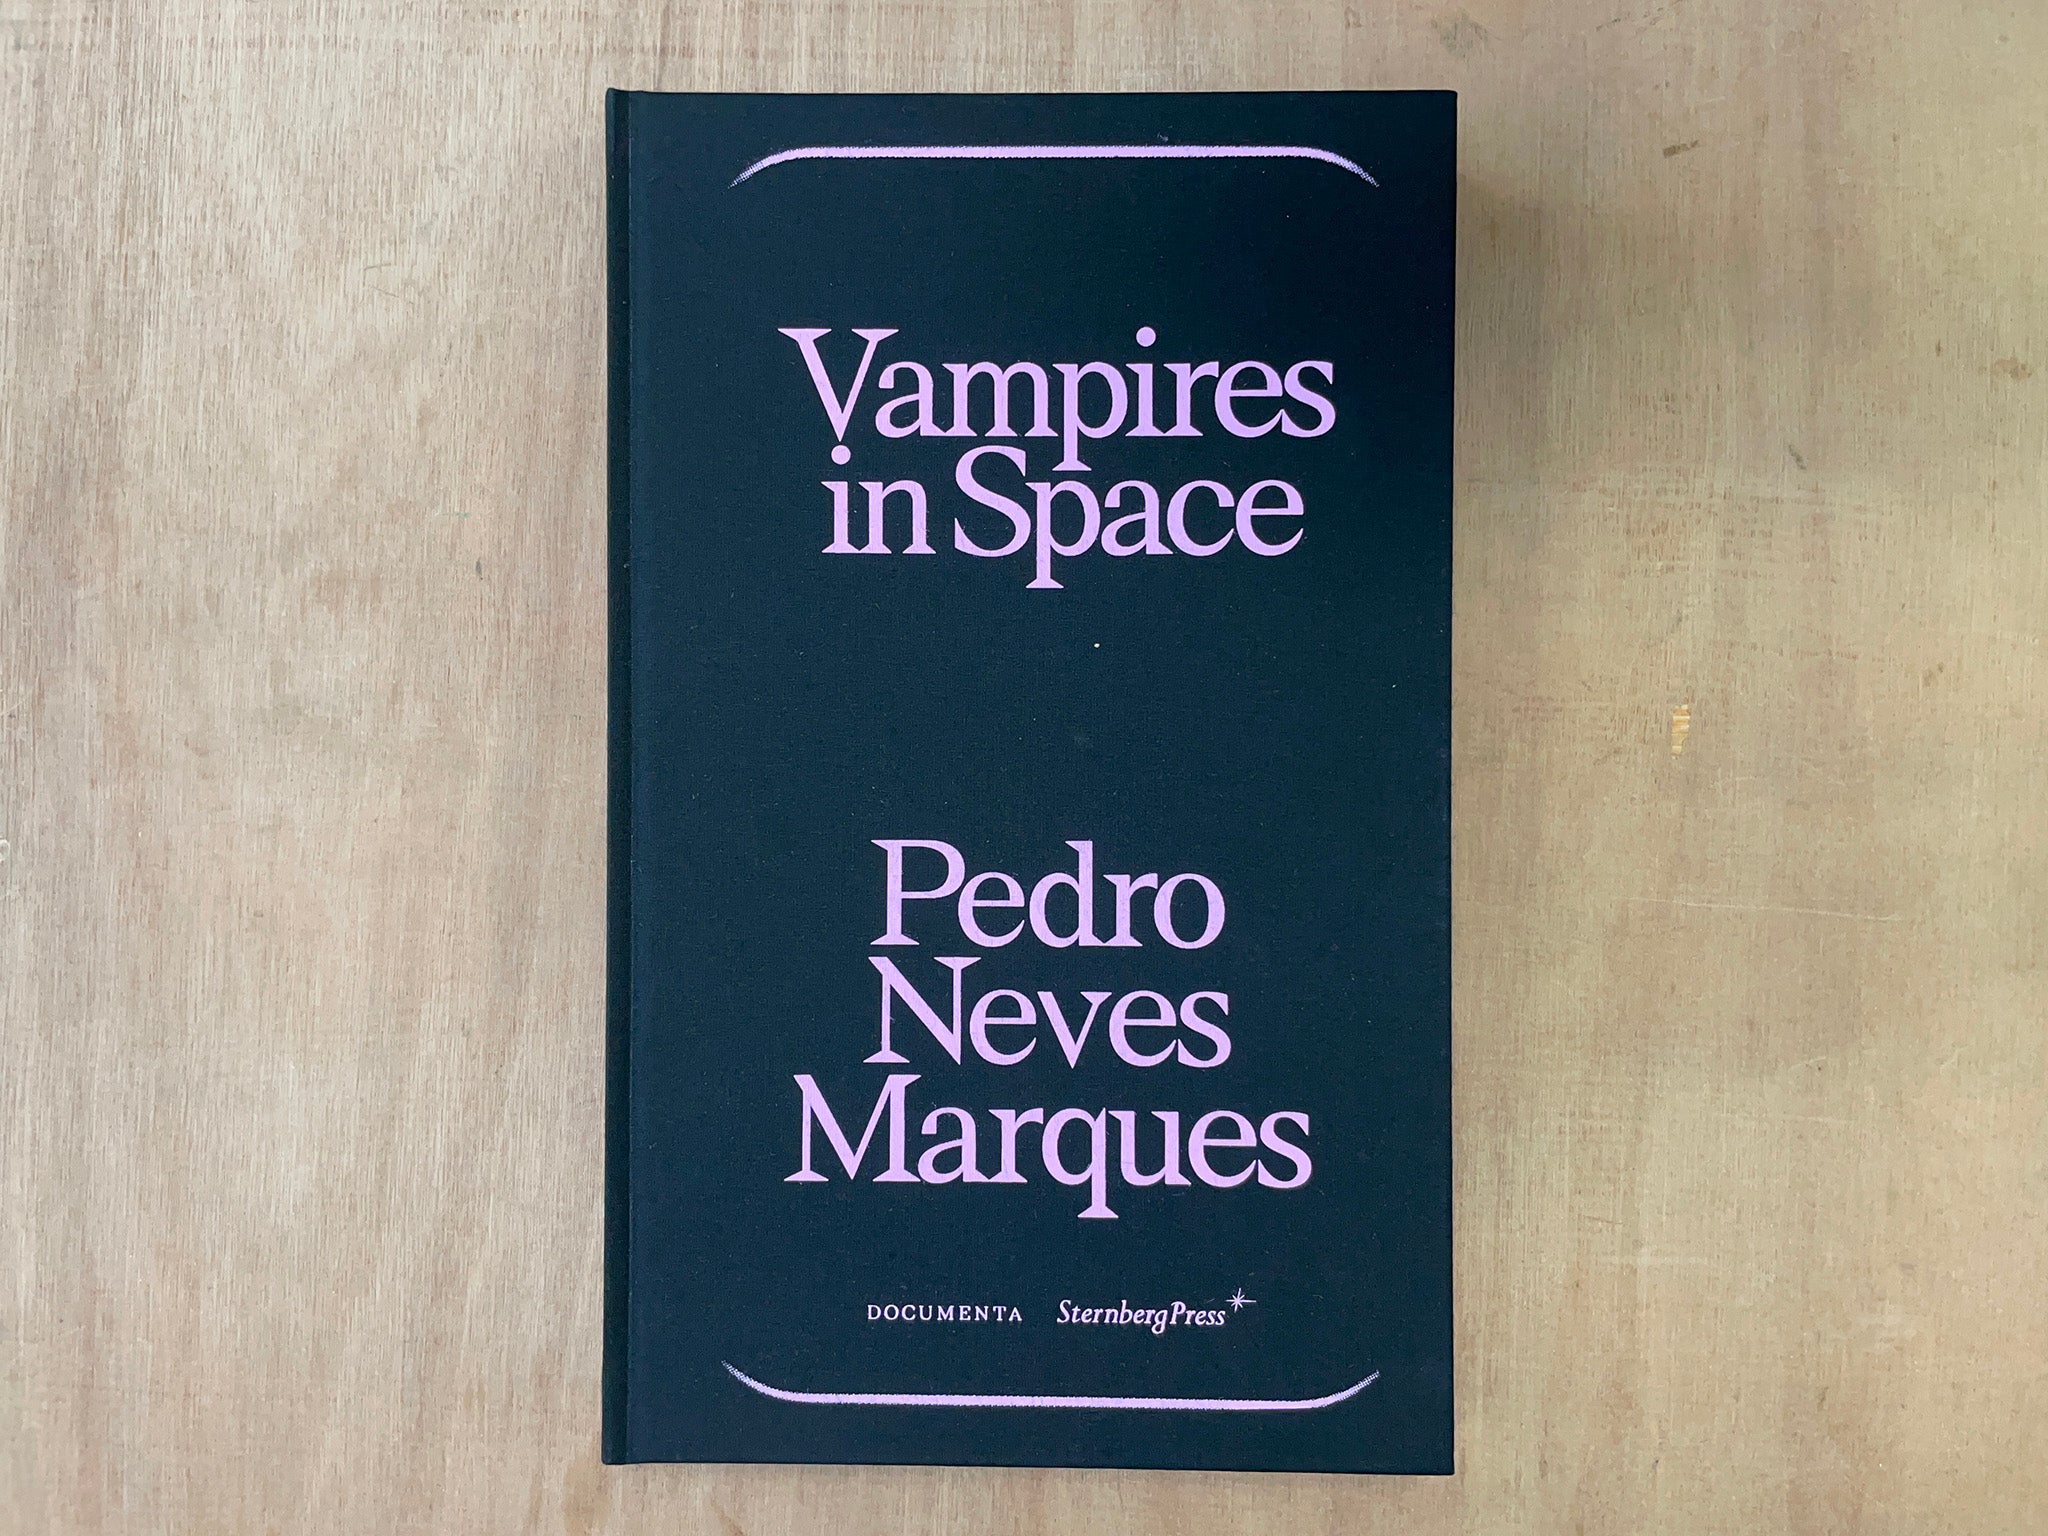 VAMPIRES IN SPACE by Pedro Neves Marques